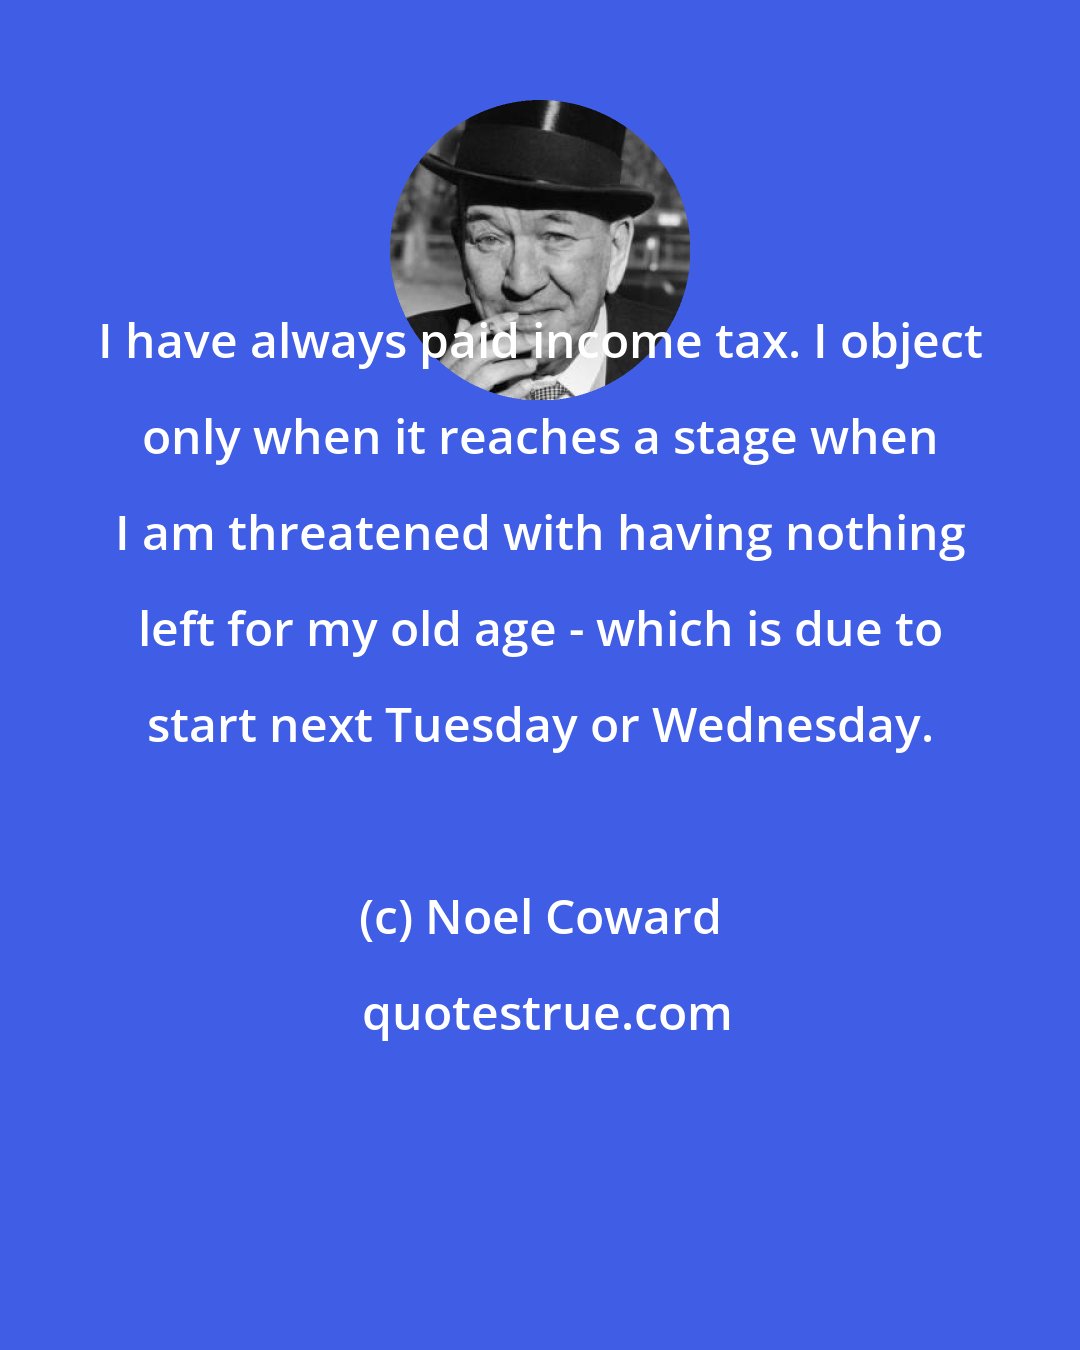 Noel Coward: I have always paid income tax. I object only when it reaches a stage when I am threatened with having nothing left for my old age - which is due to start next Tuesday or Wednesday.